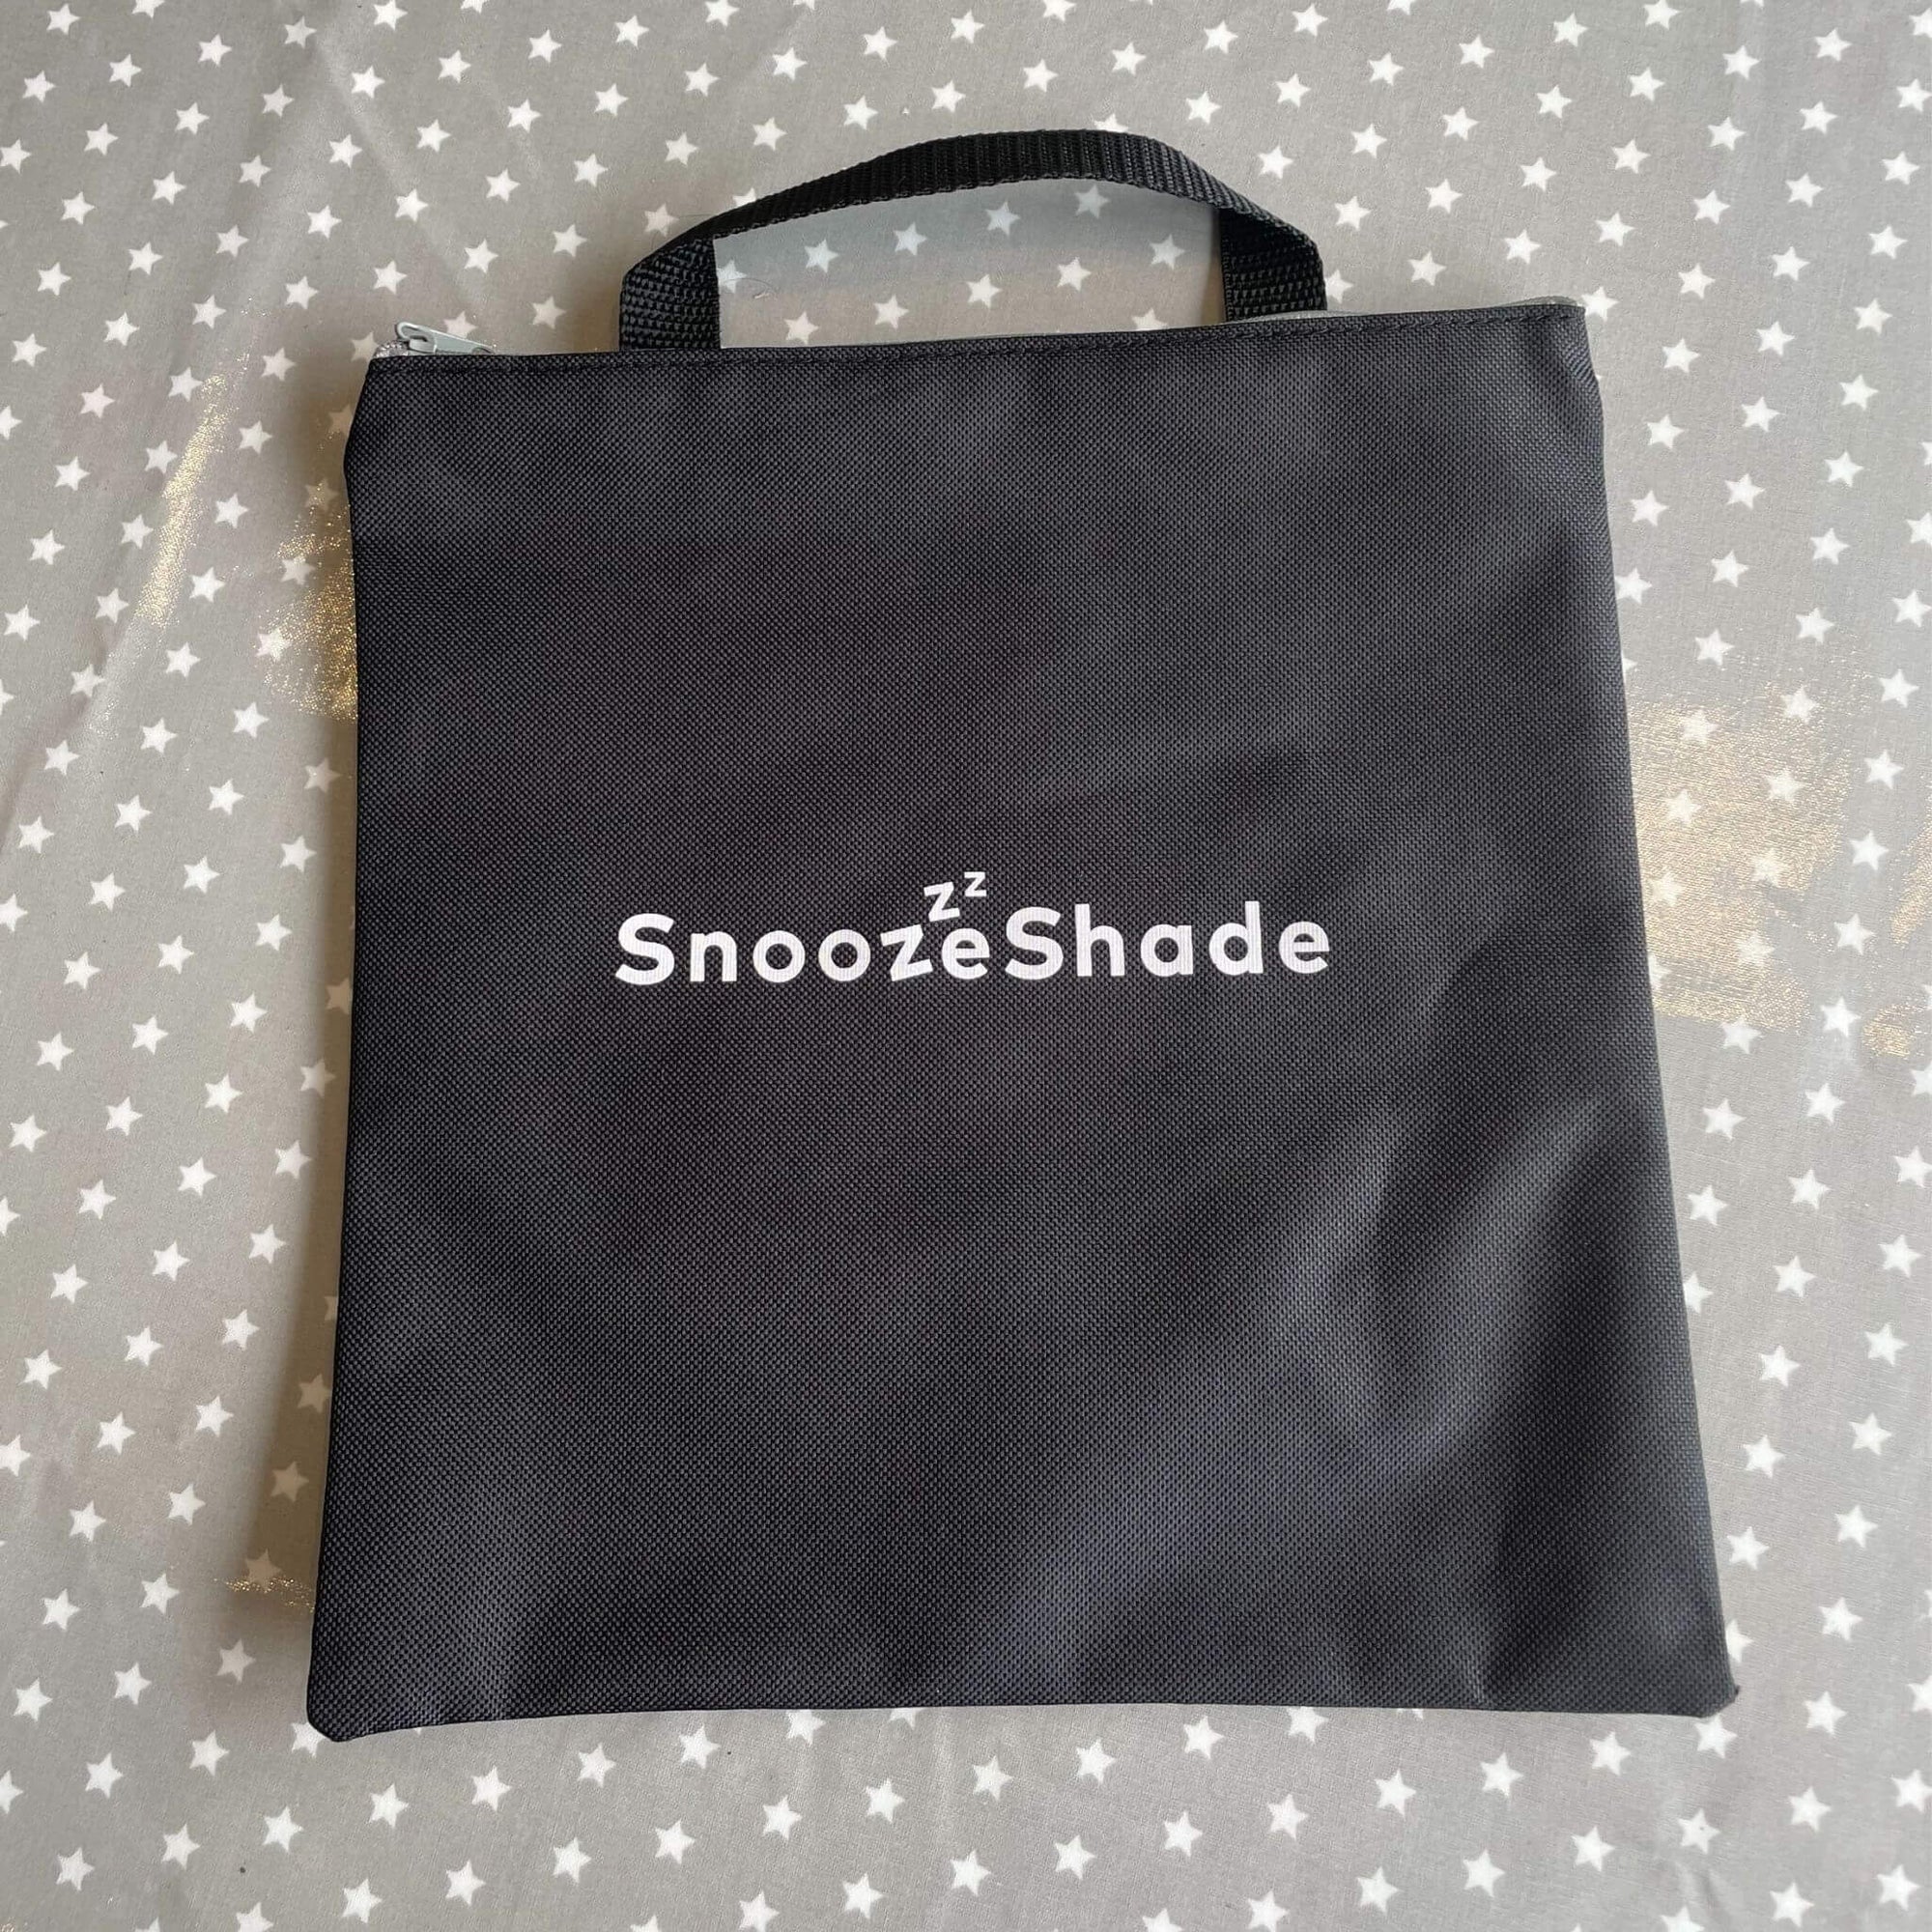 Replacement SnoozeShade storage bags